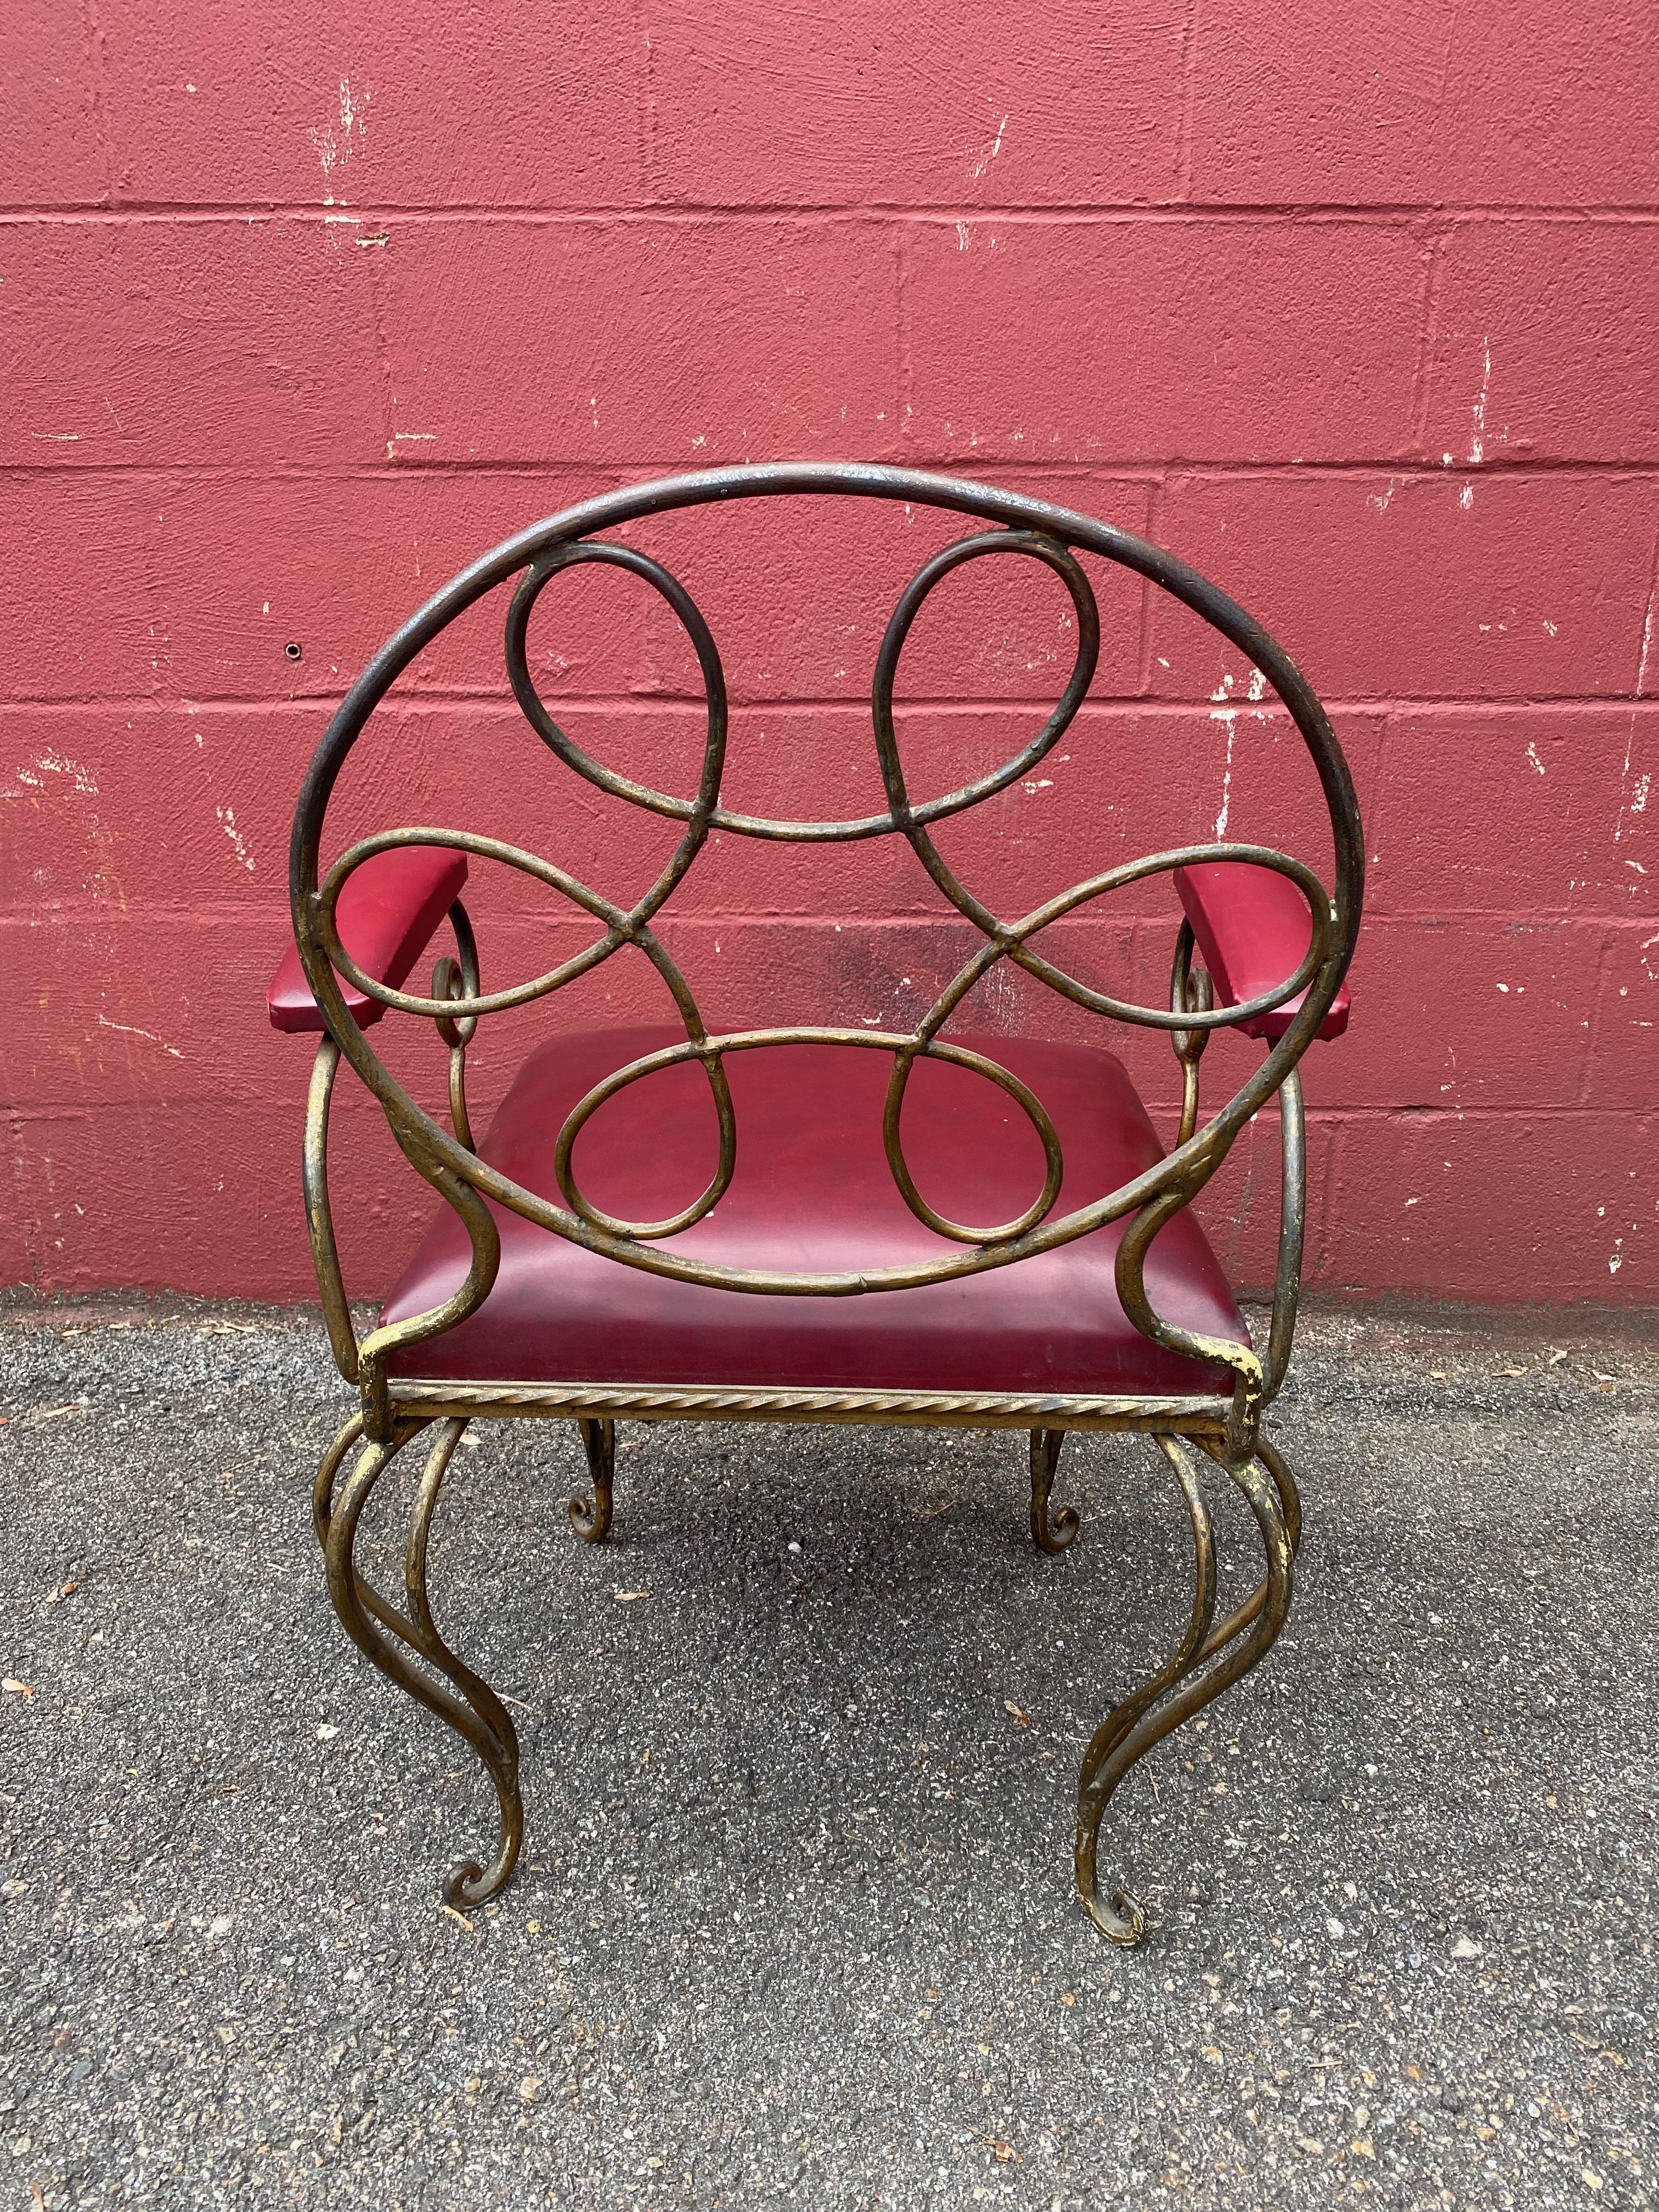 Ornate Wrought Iron Armchair in Oxblood Red Vinyl For Sale 5